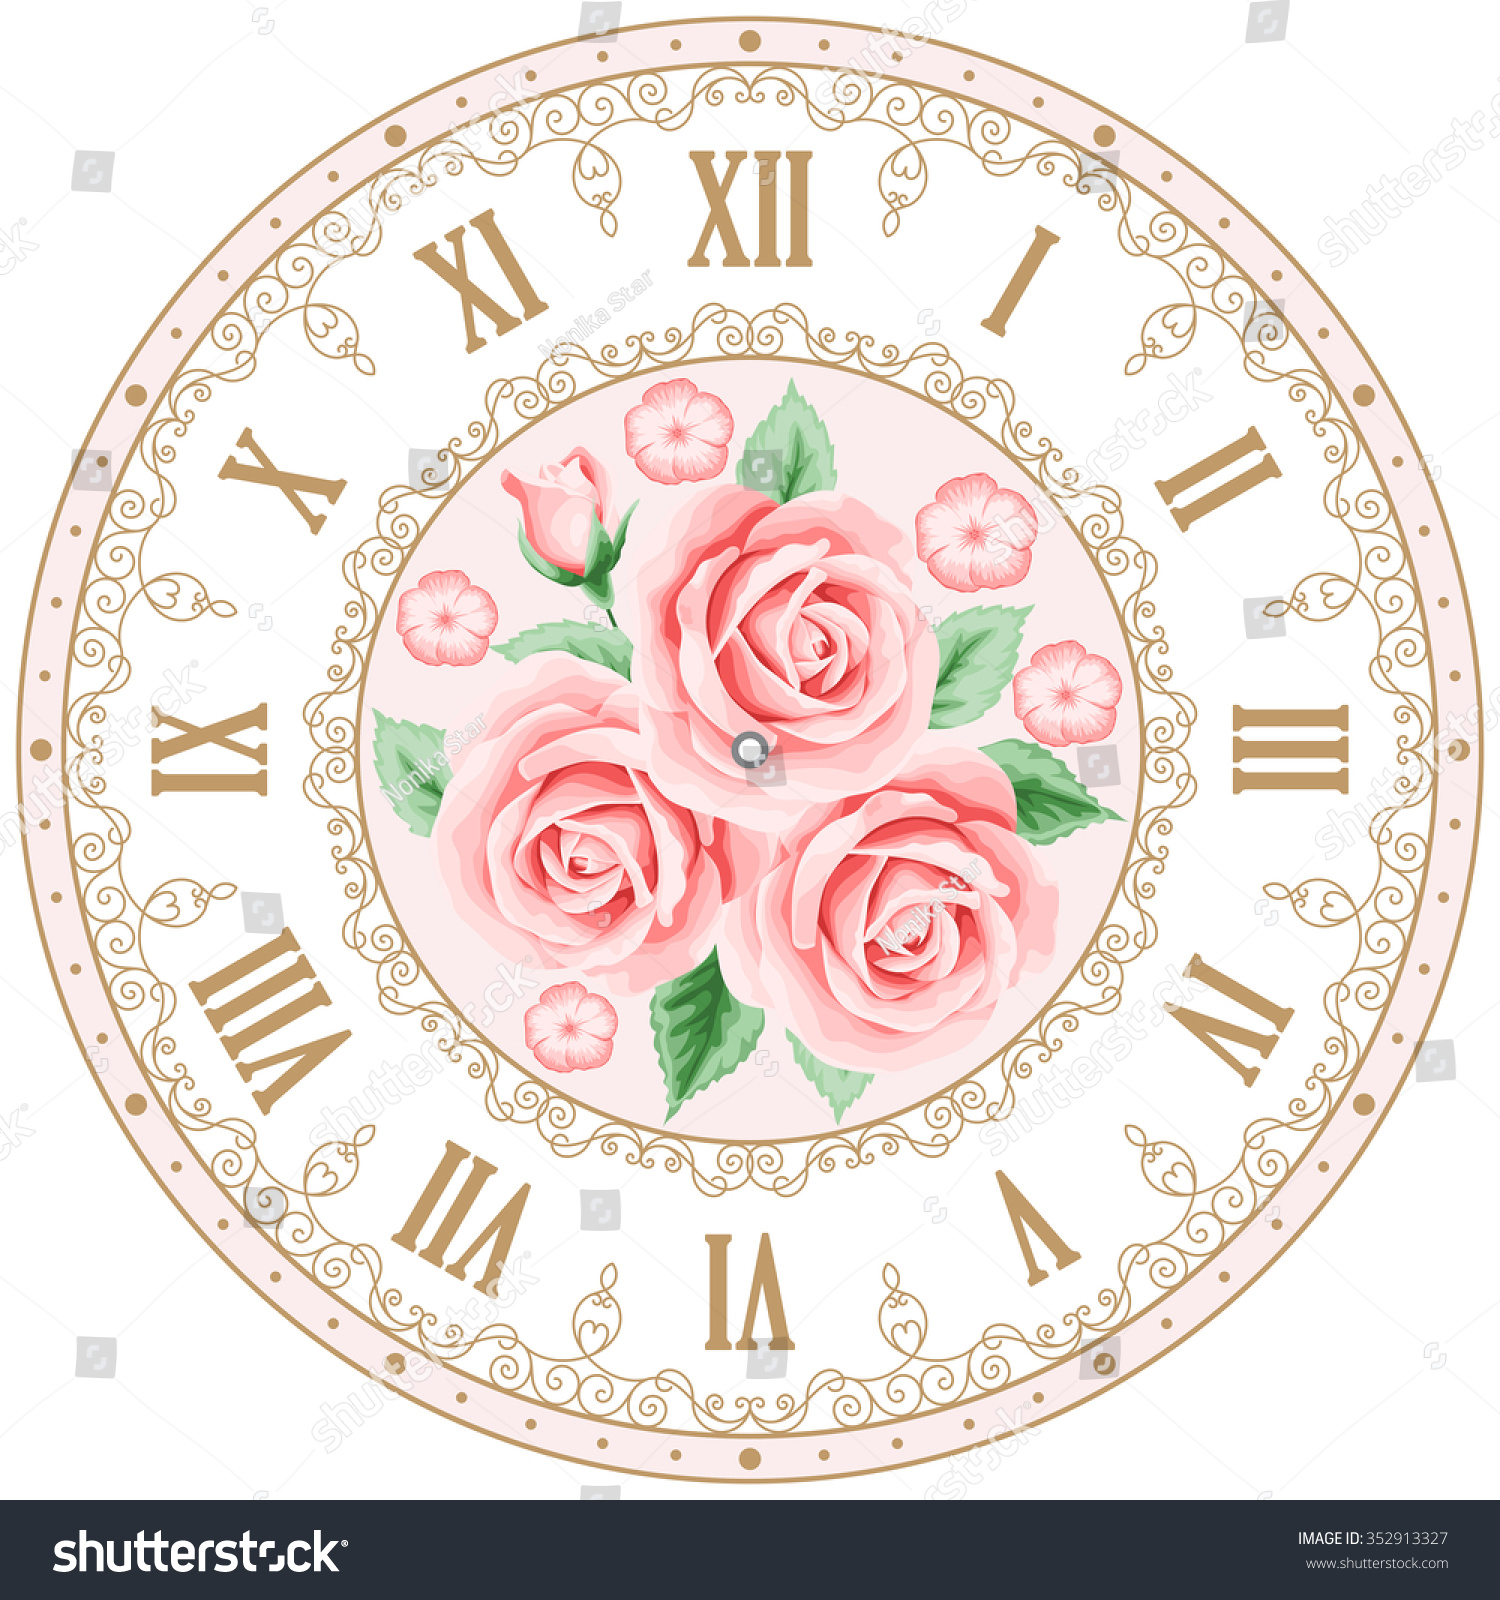 Shabby Chic Decor Comfortable High Top Canvas ShoesVintage Clock Face Roses Roman Numbers Antique Vintage Decorative for Women Girls，US 5 